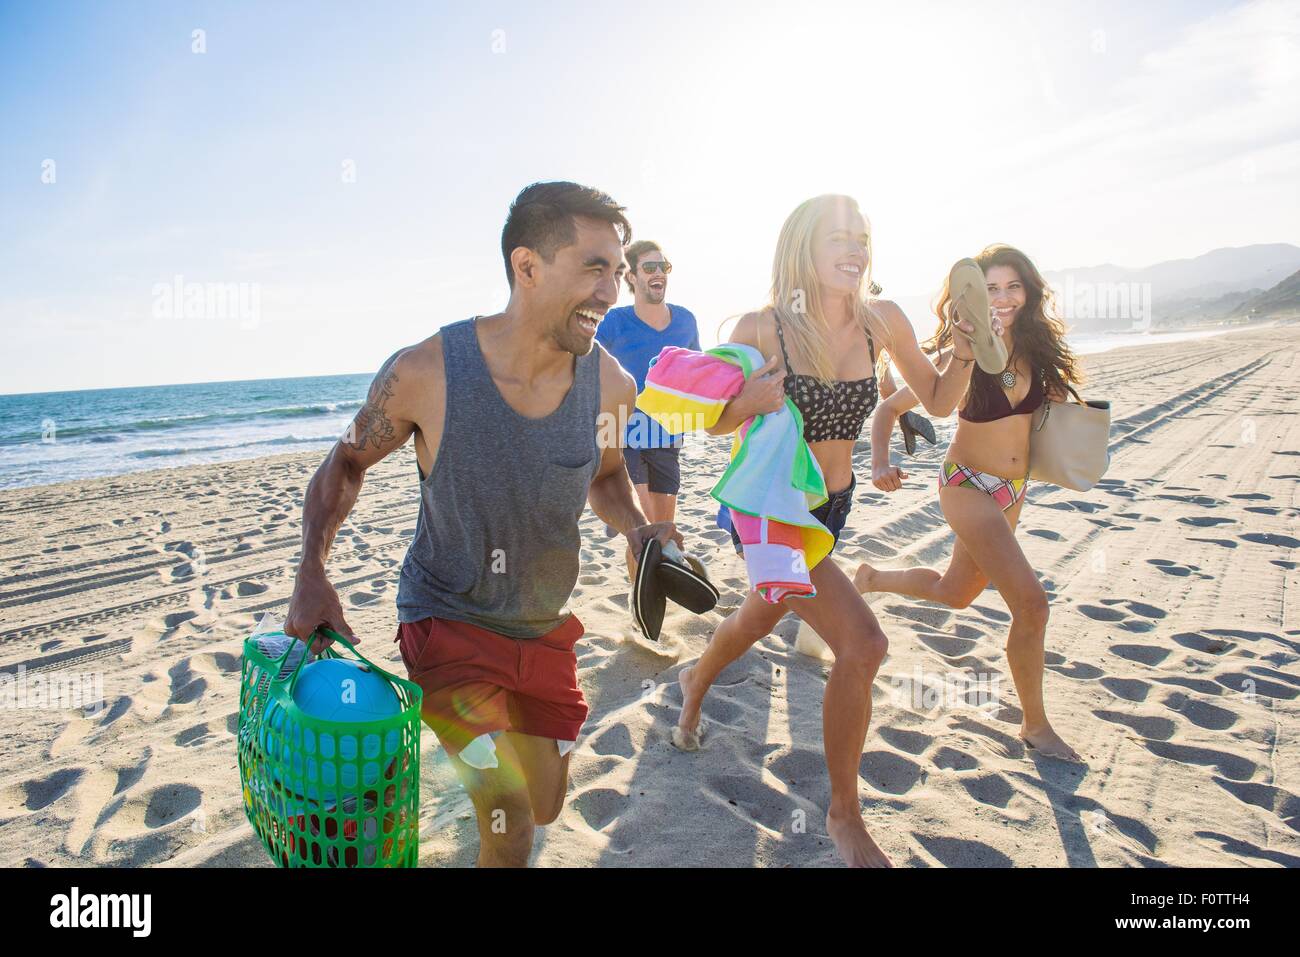 Group of friends running on beach, laughing Stock Photo